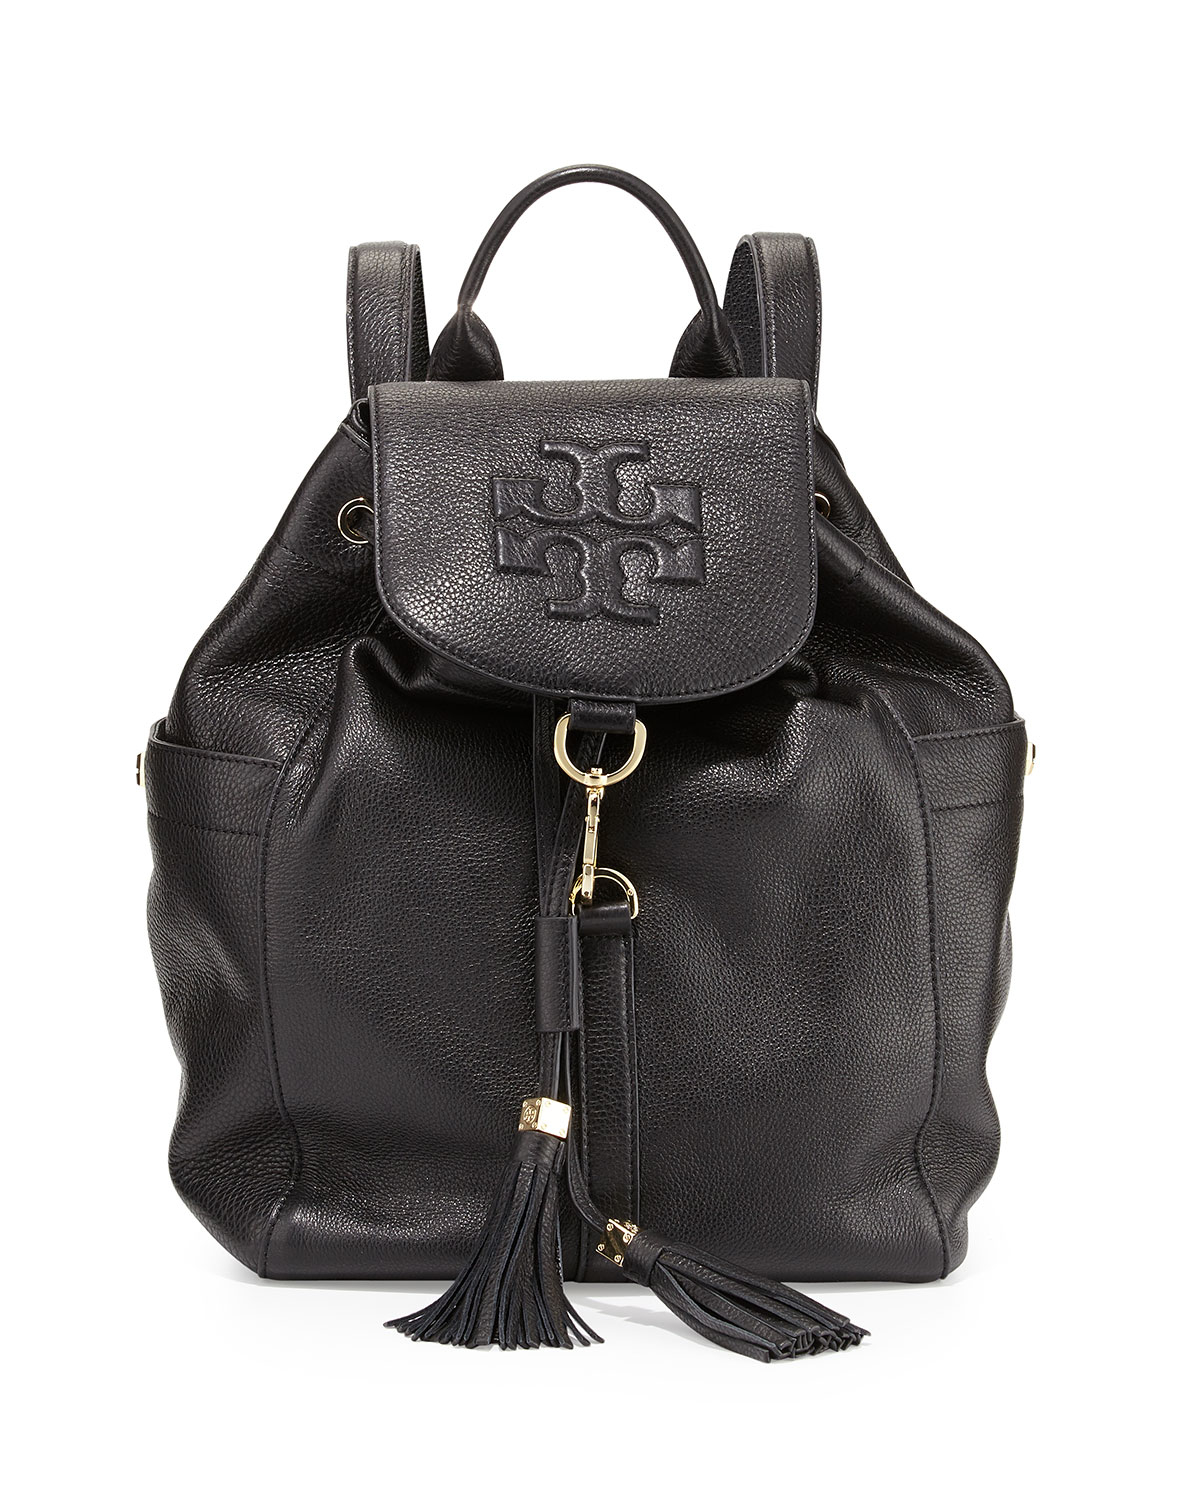 Tory Burch Thea Drawstring Leather Backpack in Black | Lyst